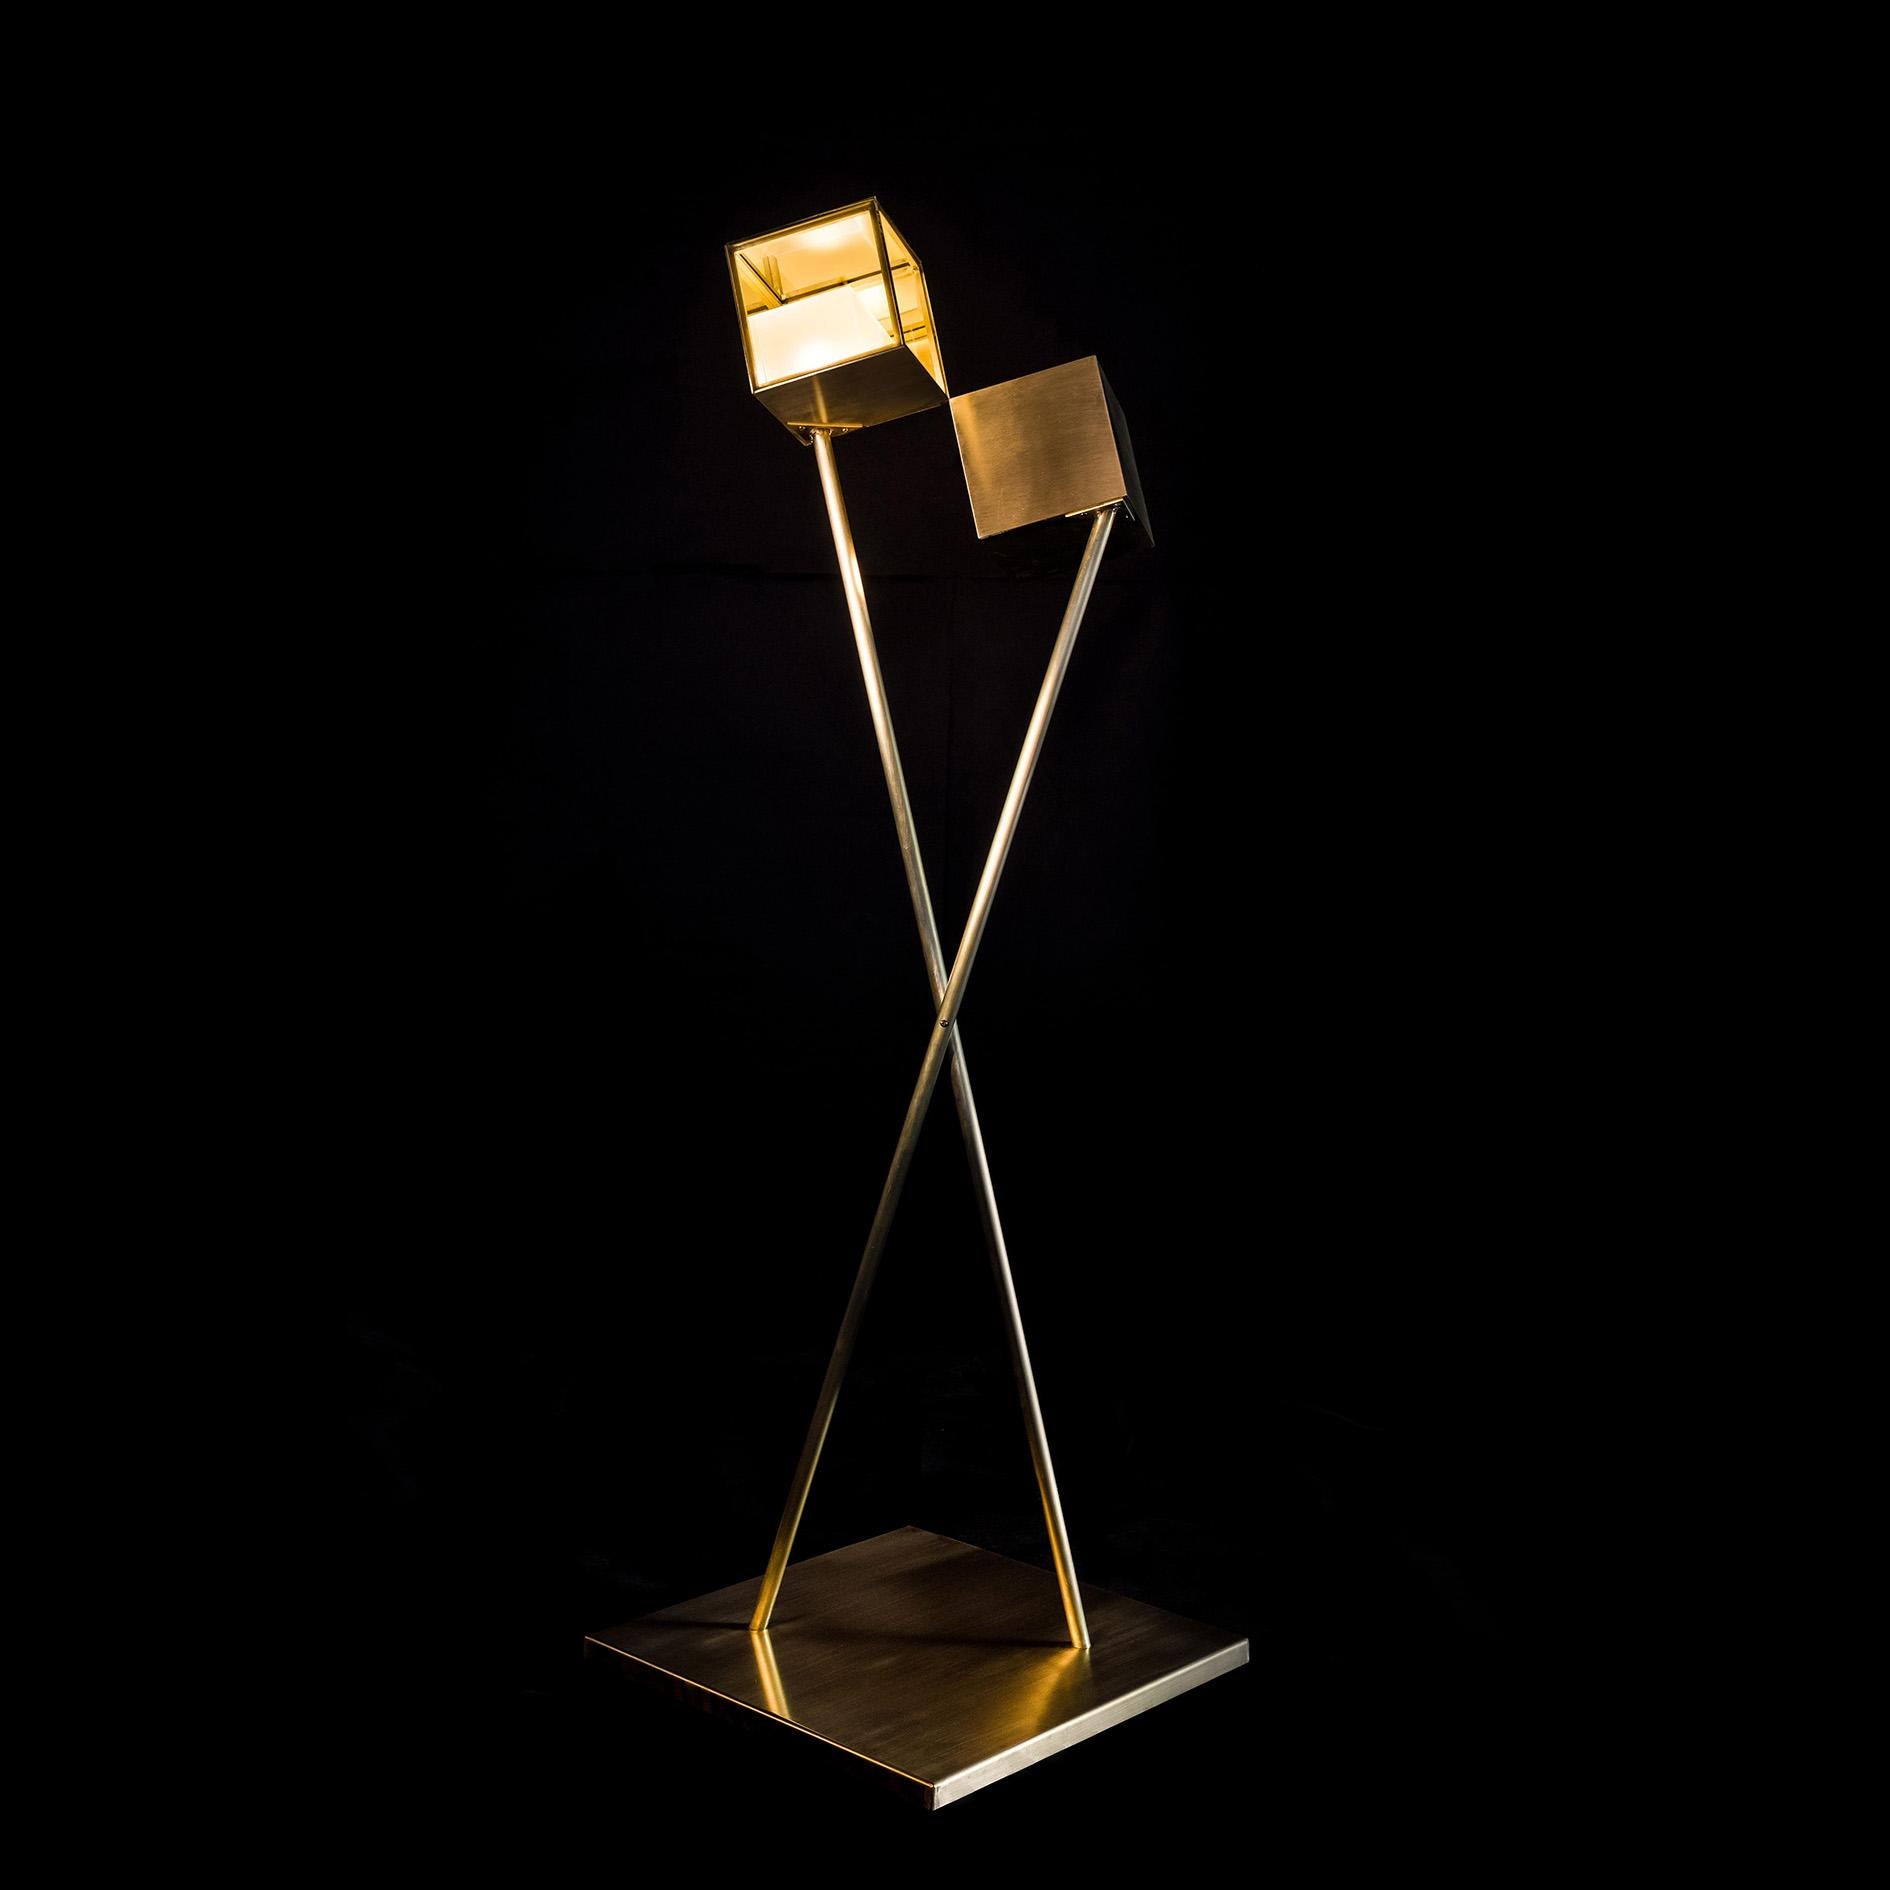 Flis by Diaphan Studio.

Flis is a sculptural floor lamp, a dynamic composition of two floating cubes. Each viewpoint unveils a different silhouette, a playful act between two elements reaching at their vertices, occasionally converging into a